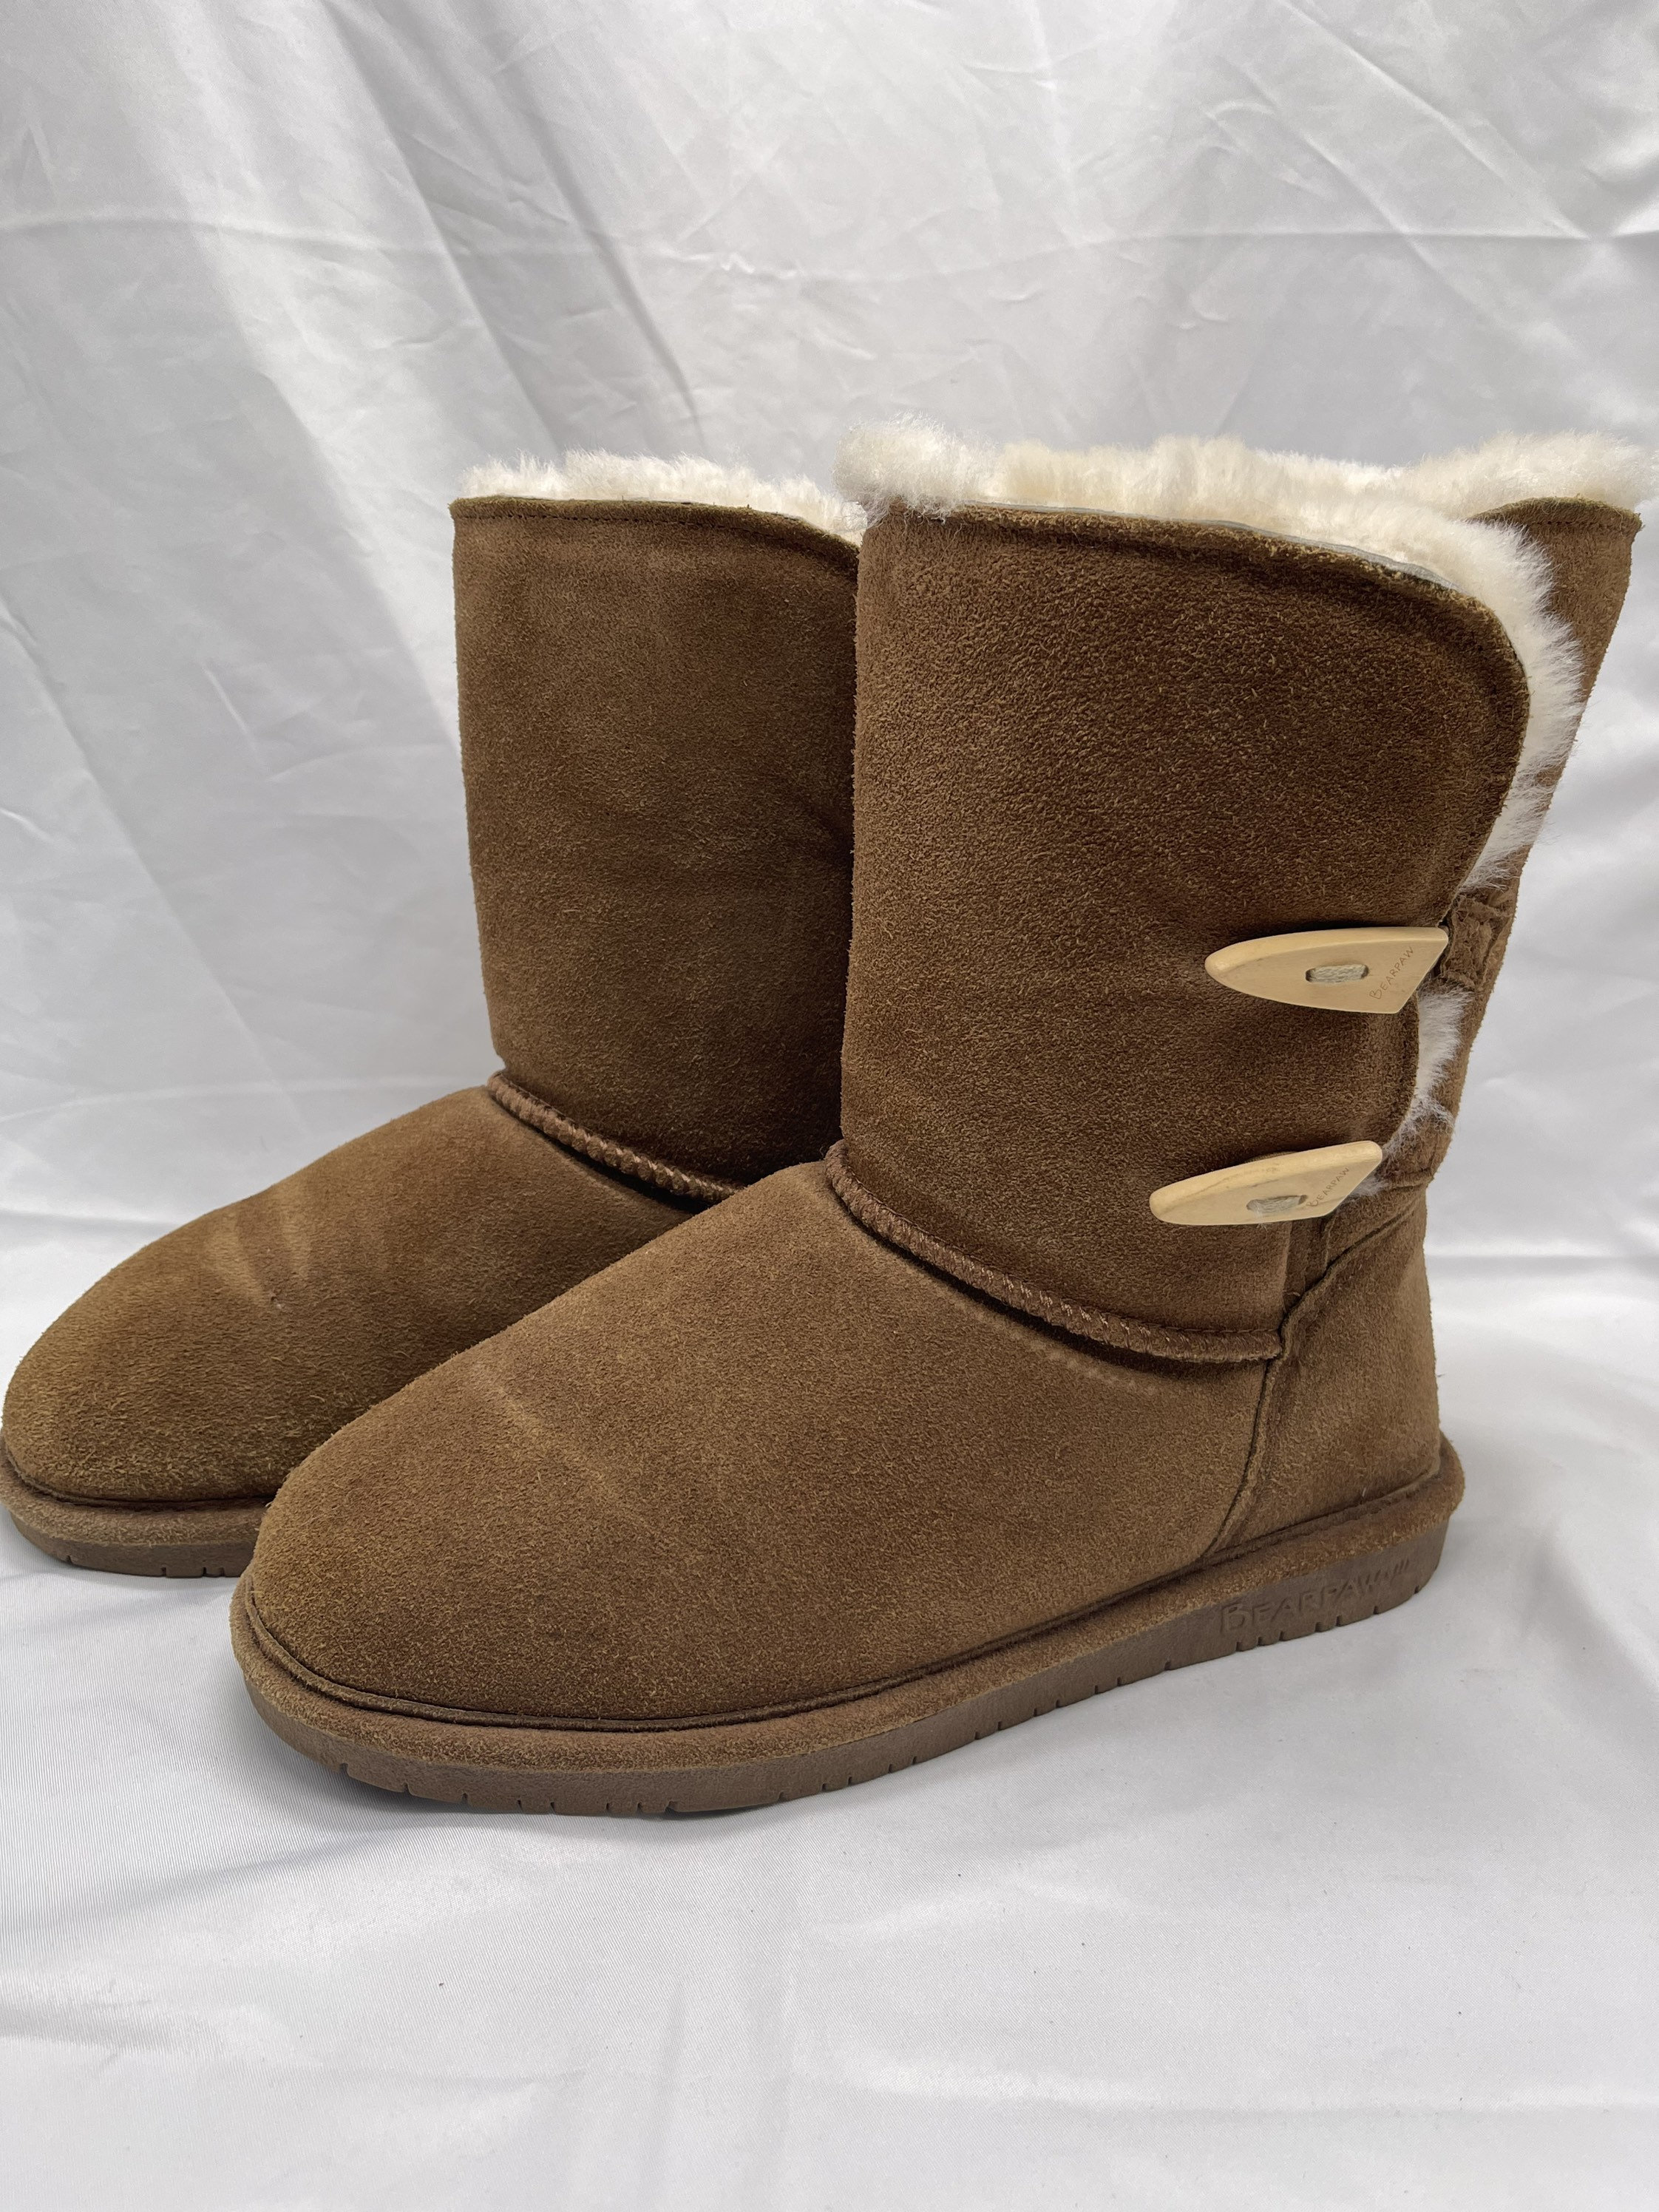 Brown Faux Suede Fur Booties Toddler Kids Girls Winter Boots Shoes Pom Poms  5